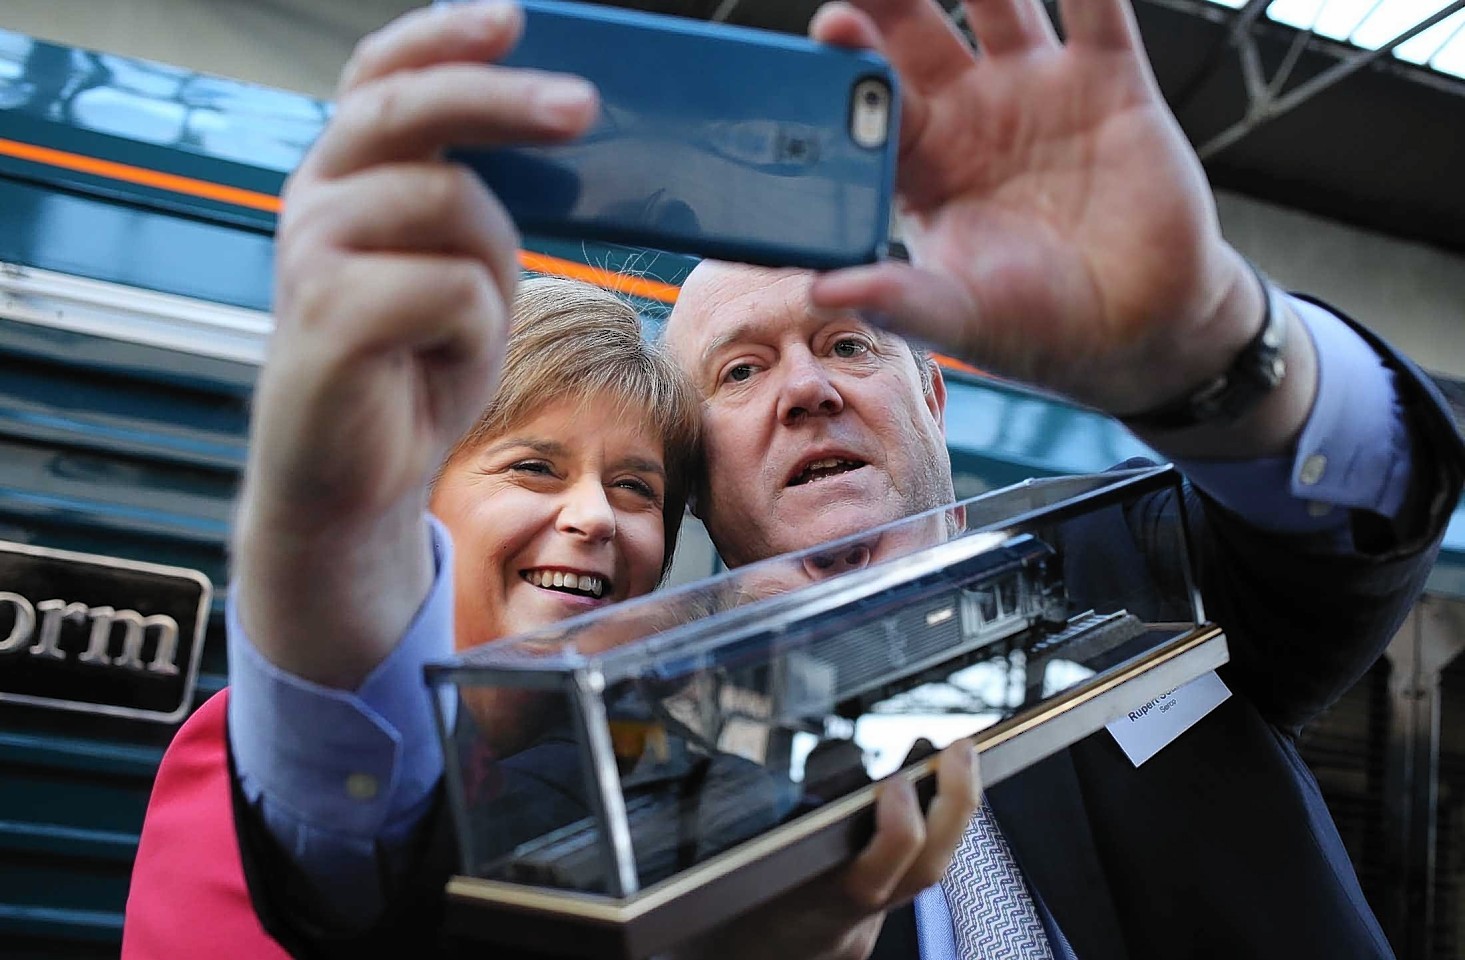 Nicola Sturgeon takes a selfie at the launch of the new service